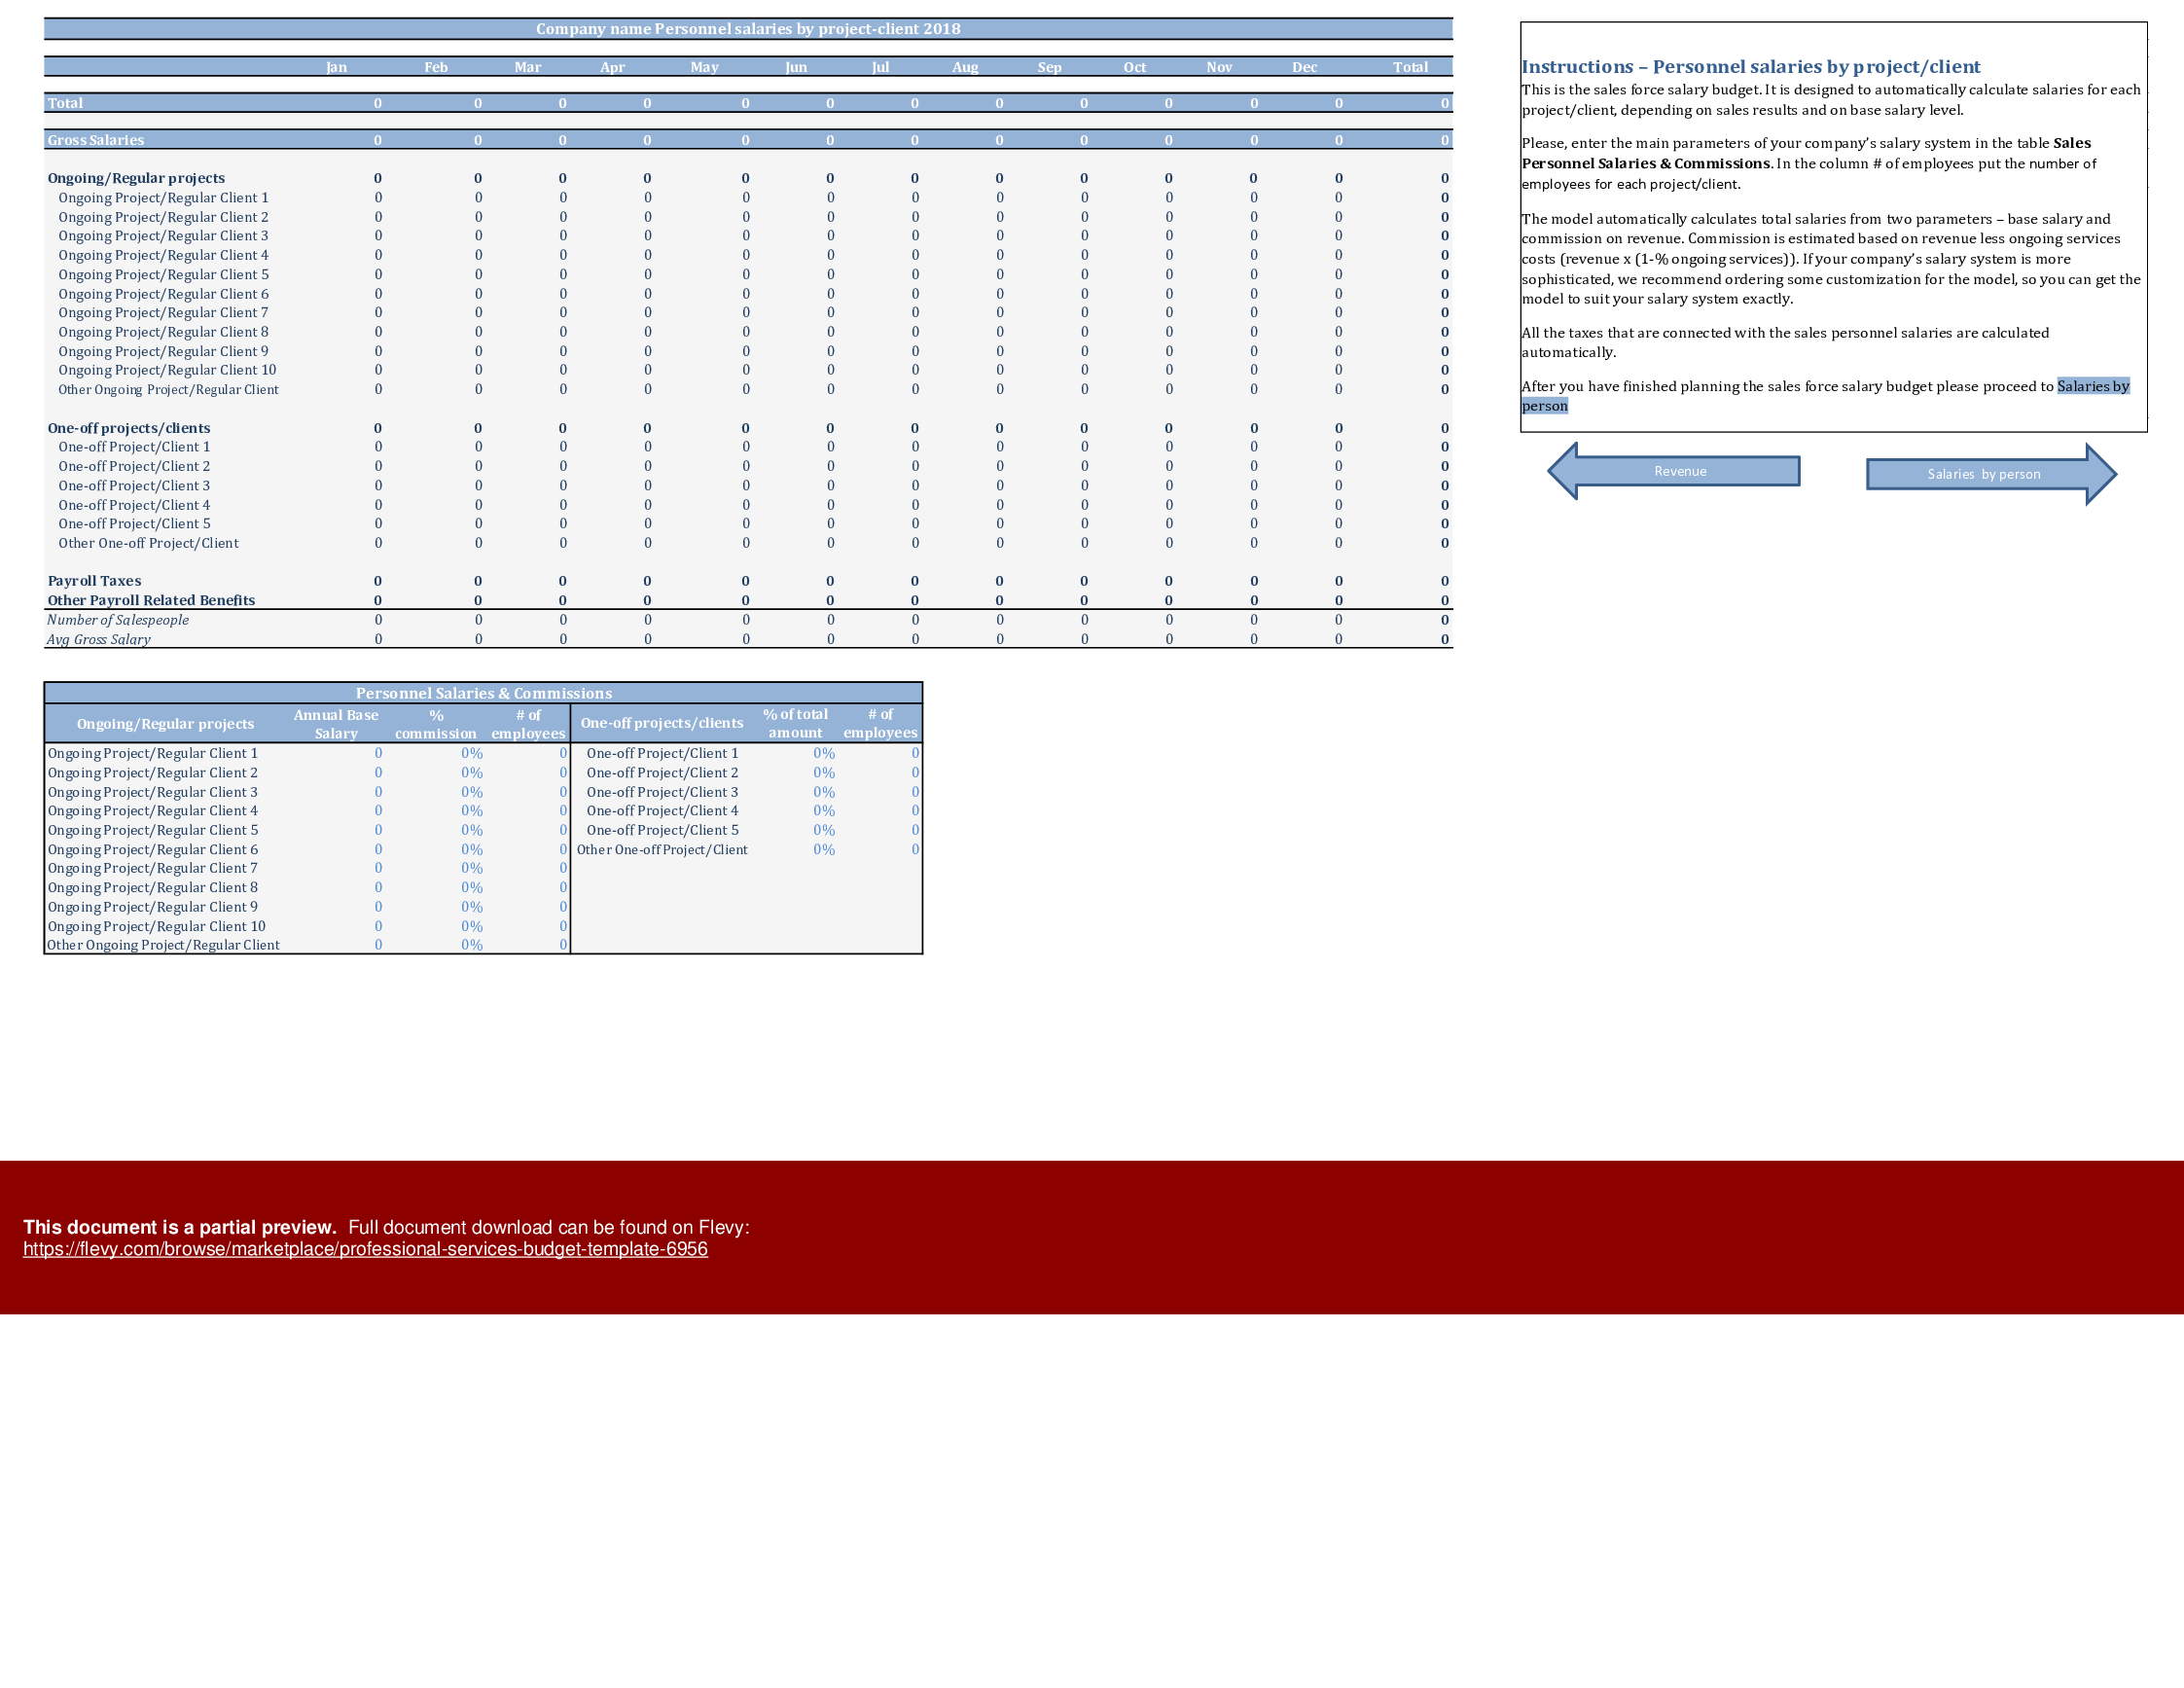 Professional Services Financial Planning Model (Excel template (XLS)) Preview Image